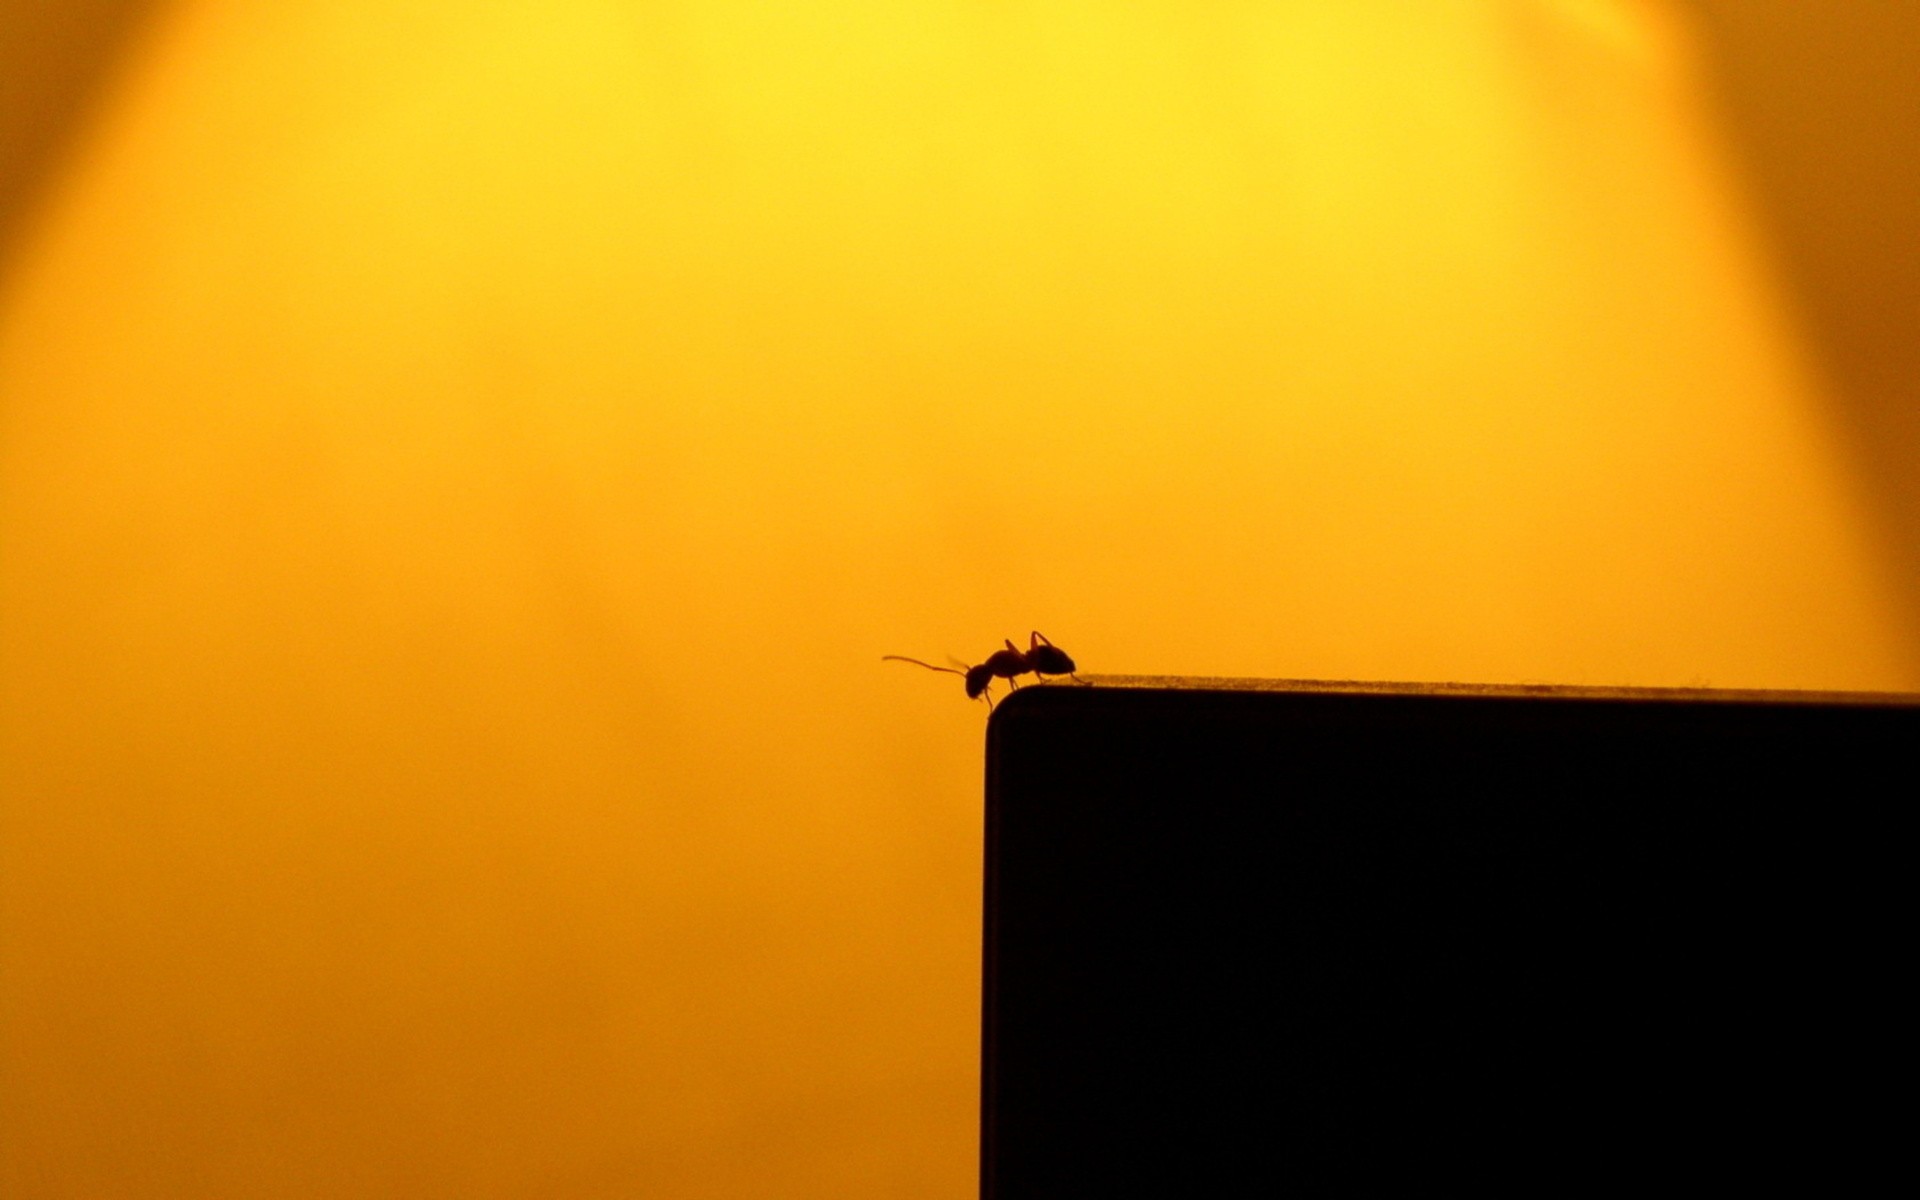 insects, Ants, Silhouettes, Sunlight Wallpaper